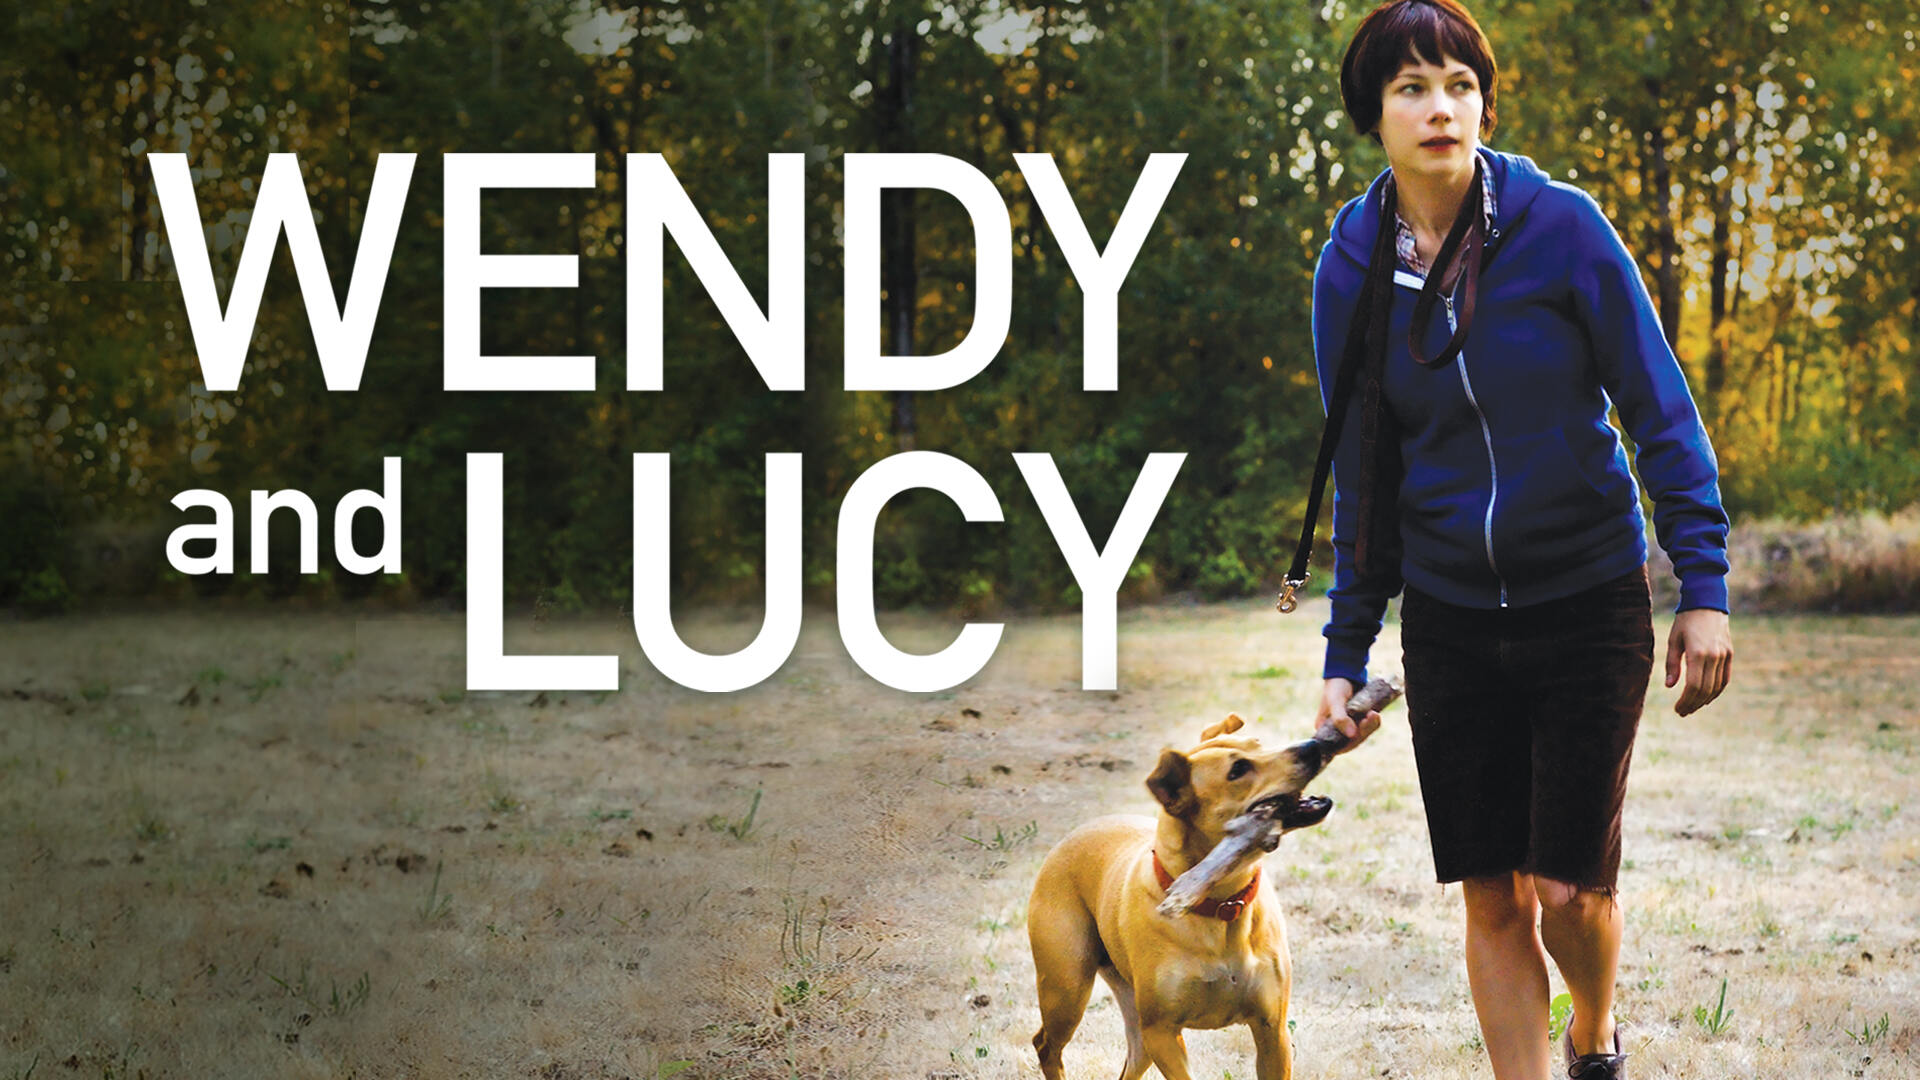 49-facts-about-the-movie-wendy-and-lucy